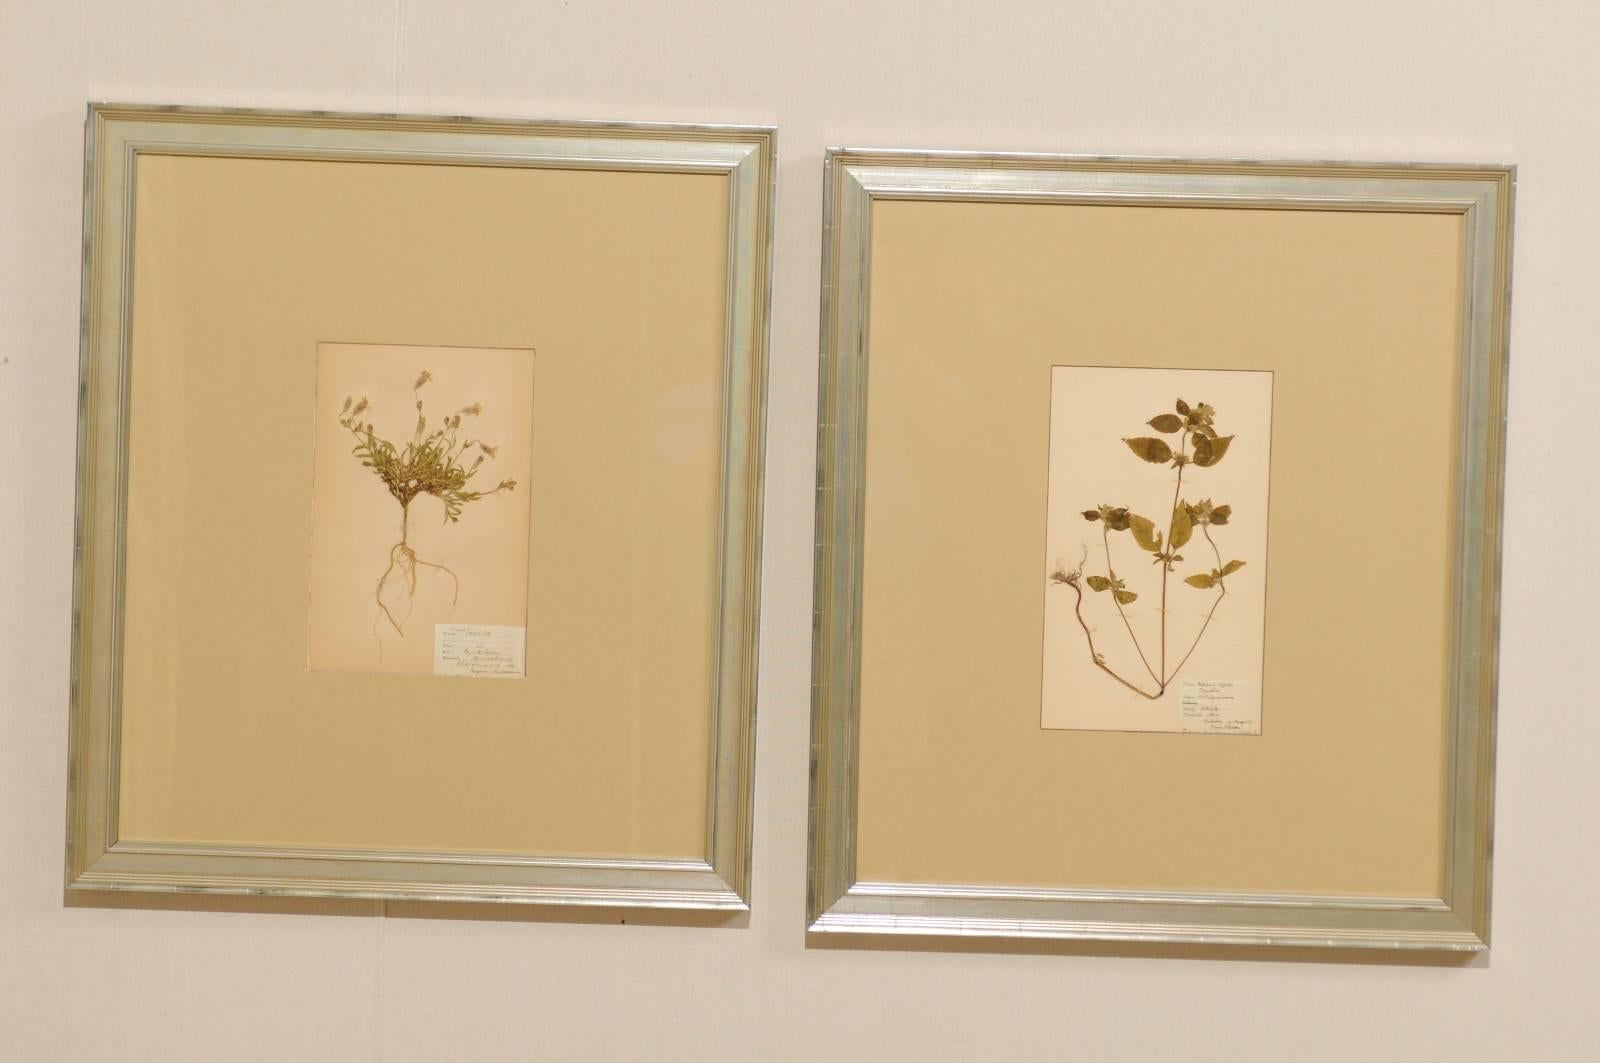 A pair of Swedish framed herbariums and botanicals from the early 20th century. These Swedish 1920s and 1930s herbariums are larger sized and featured in custom silver frames. Each pressed botanical specimens includes a hand written label with the